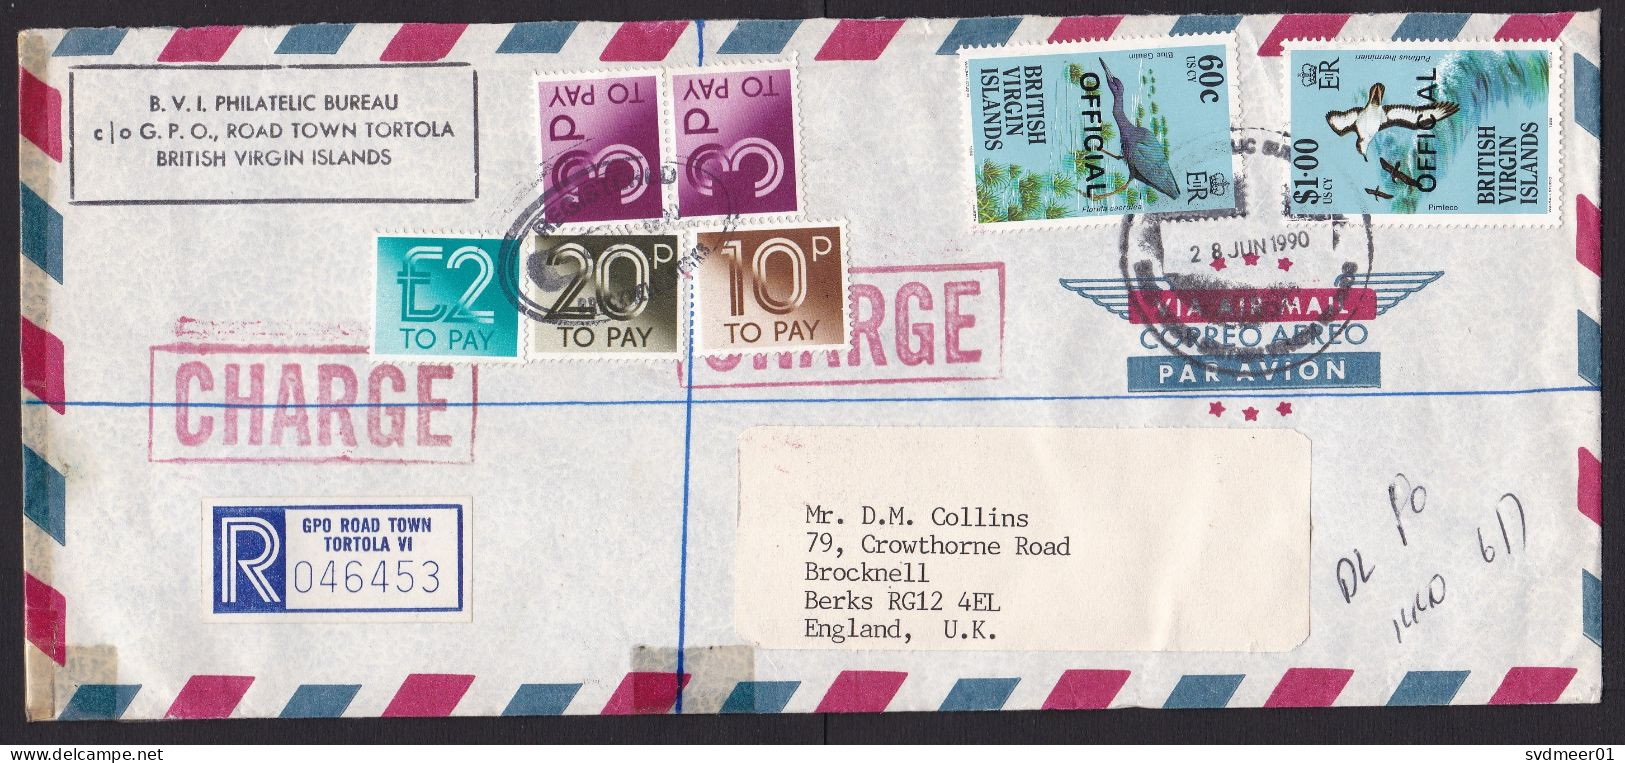 British Virgin Islands: Cover To UK, 1990, 2 Stamps, 5x Due Stamp, 3x Label, Charge, Customs, Taxed (minor Discolouring) - British Virgin Islands